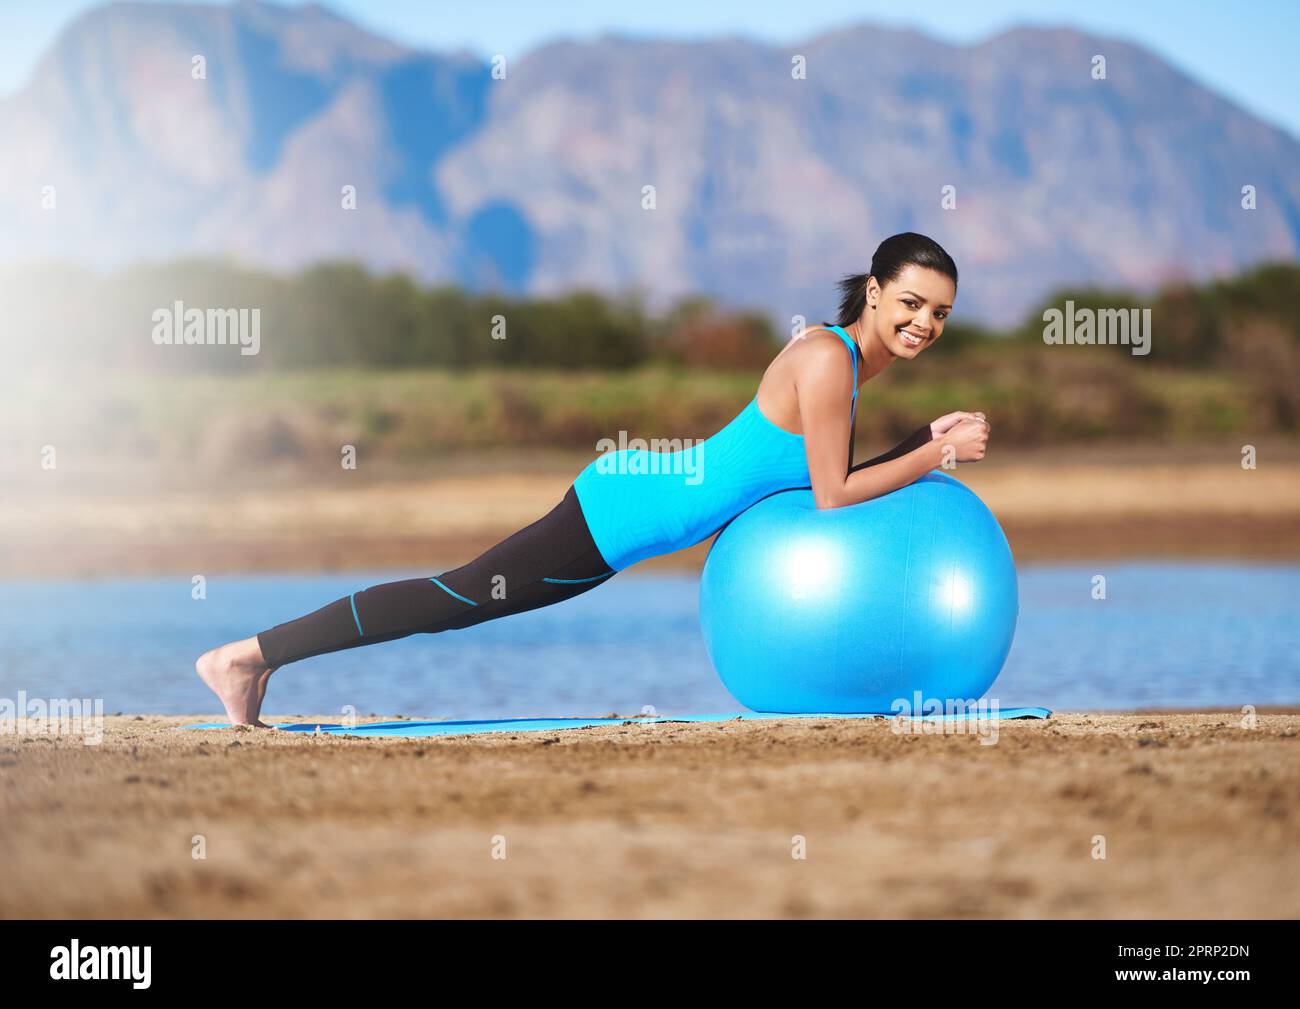 Comfort zone hi-res stock photography and images - Alamy